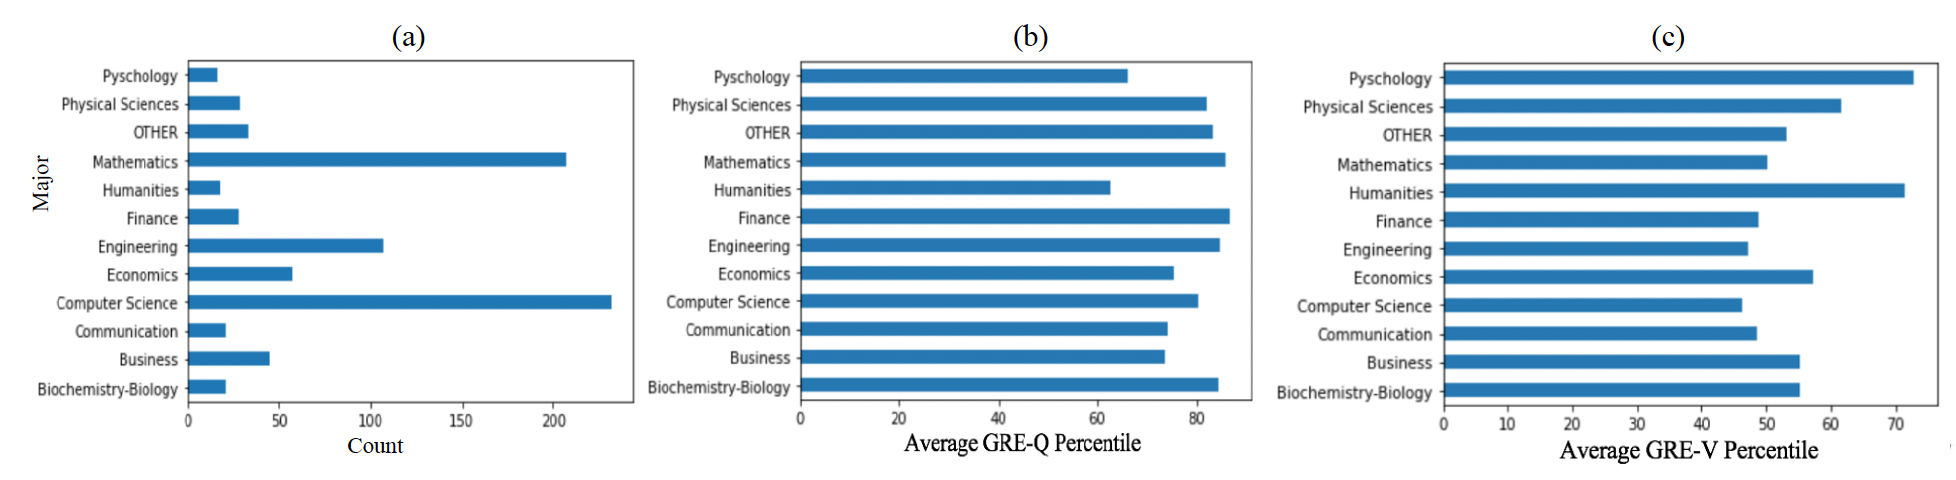 Applicant Count (a), Average GRE-Q (b) and GRE-V (c) Percentiles by Major